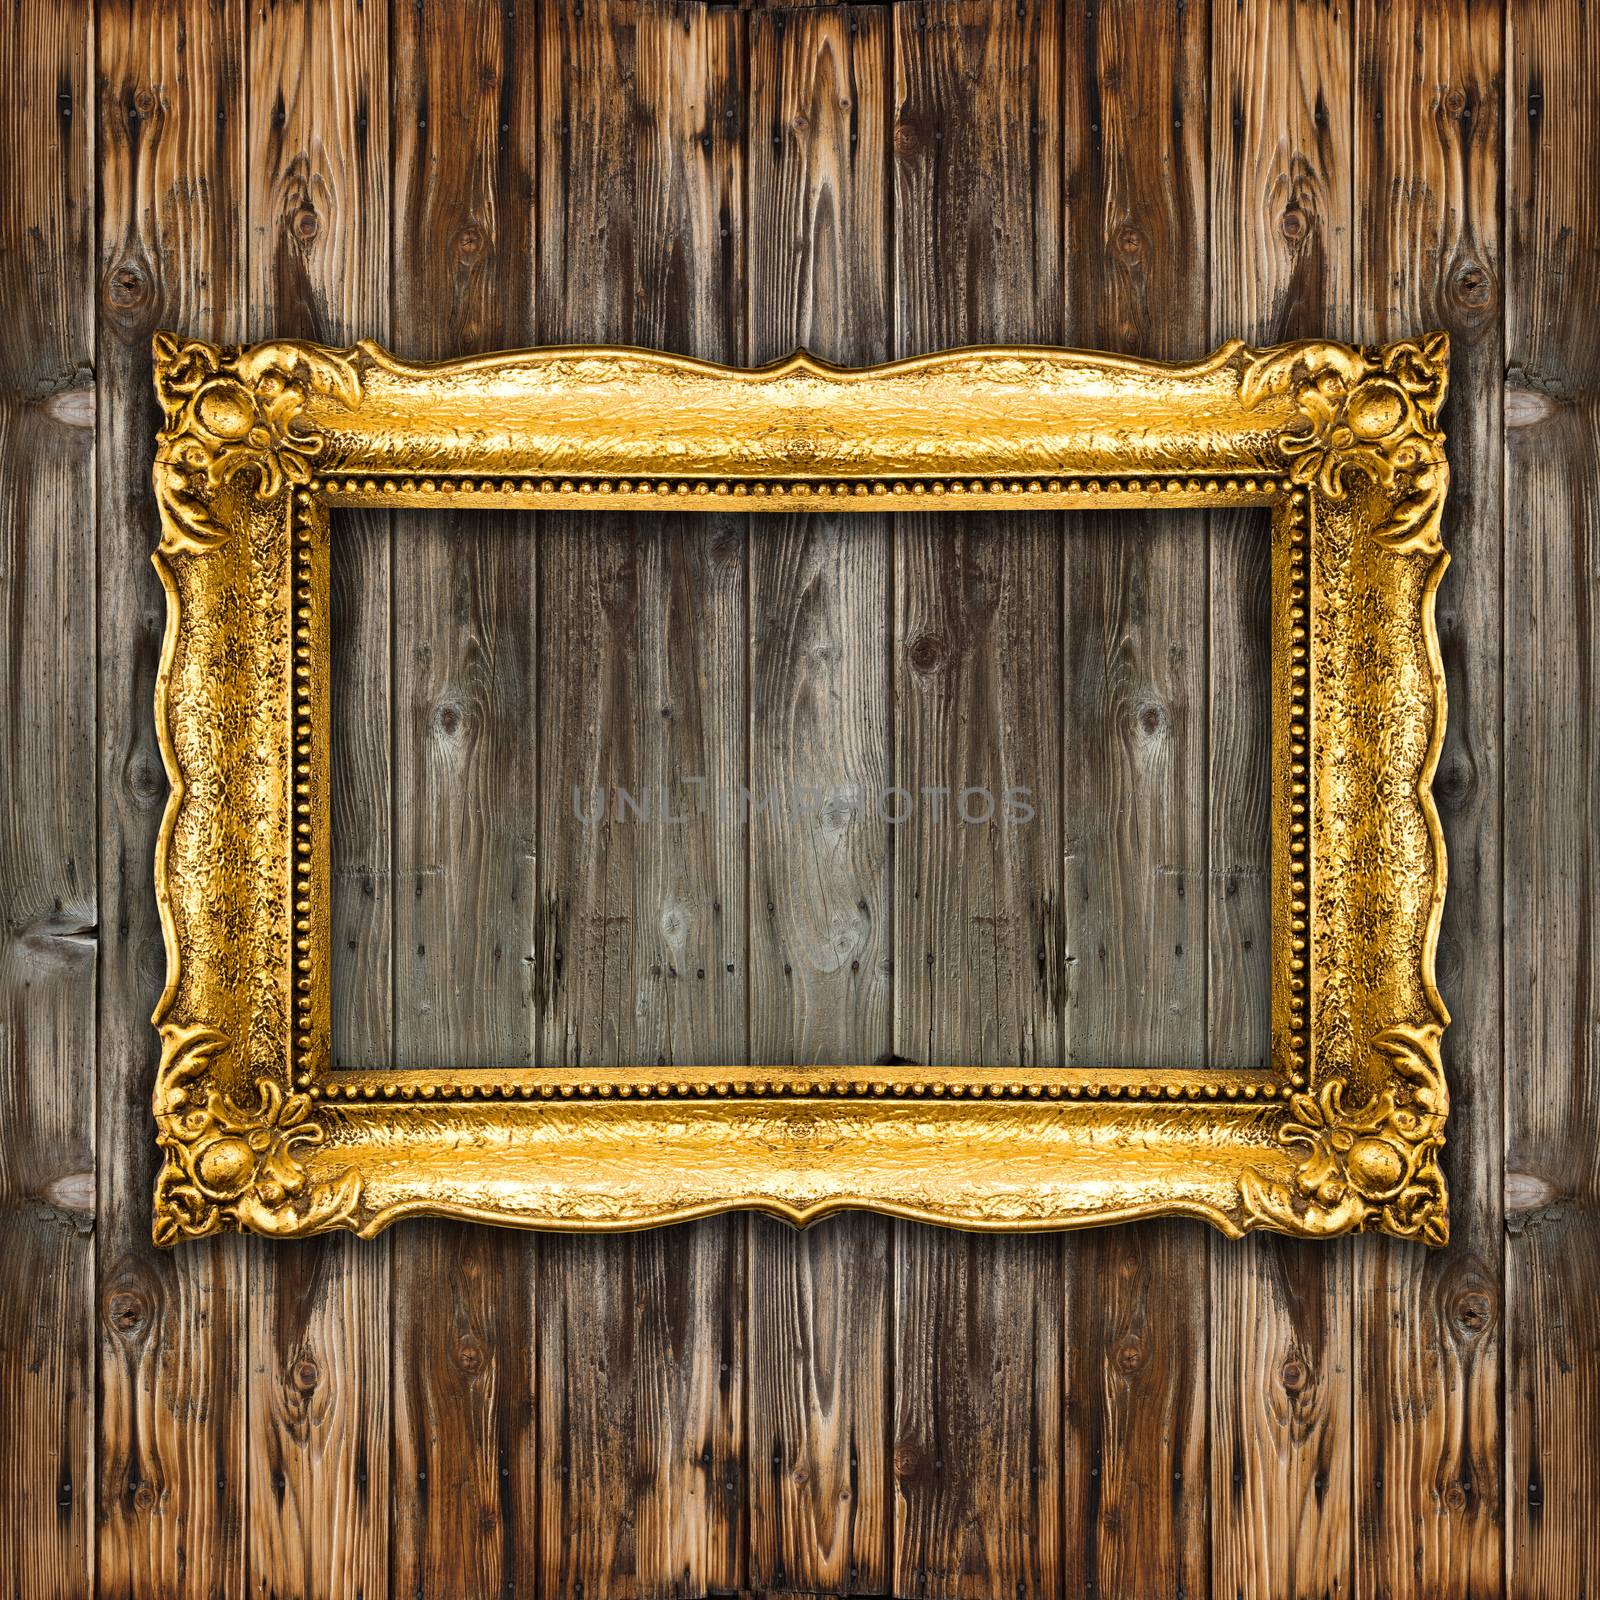 Big Retro Old Gold Picture Frame by adamr